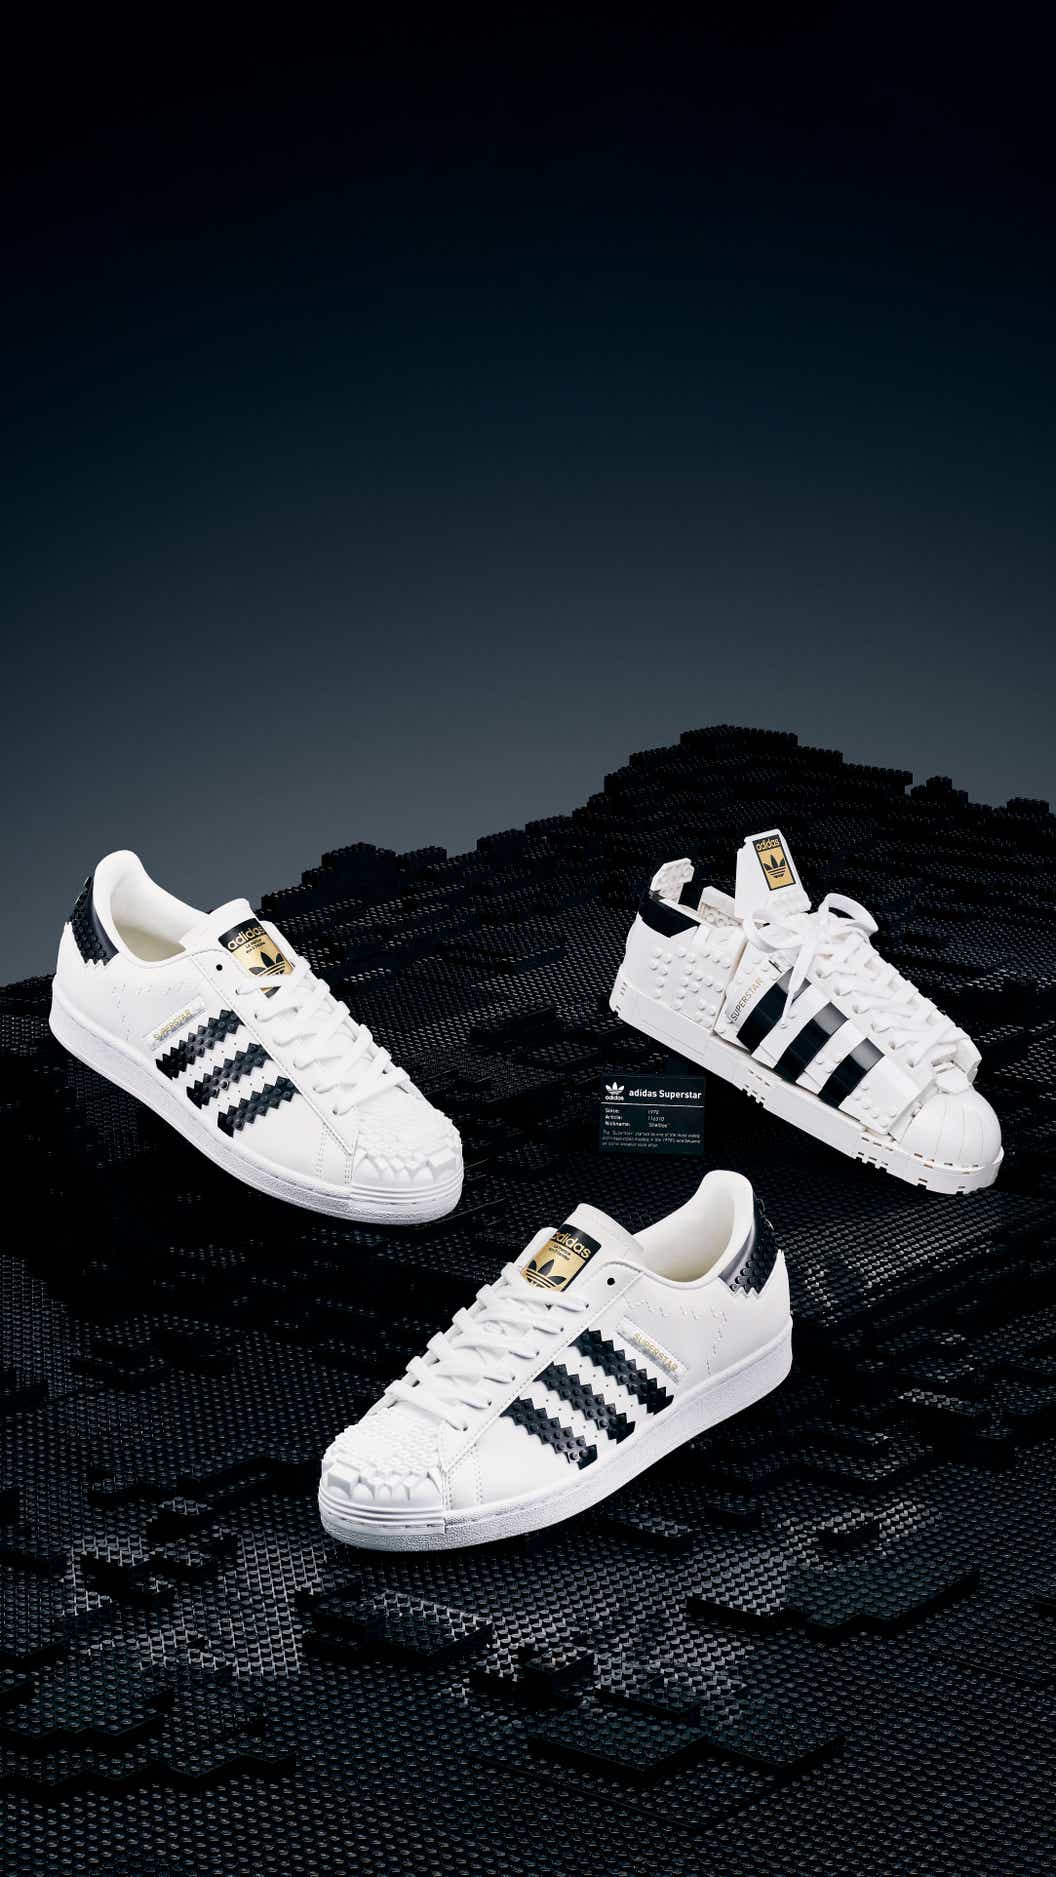 adidas Originals and the LEGO Group Launch Superstar AND surprising LEGO® edition of the sneaker icon - About us - LEGO.com US